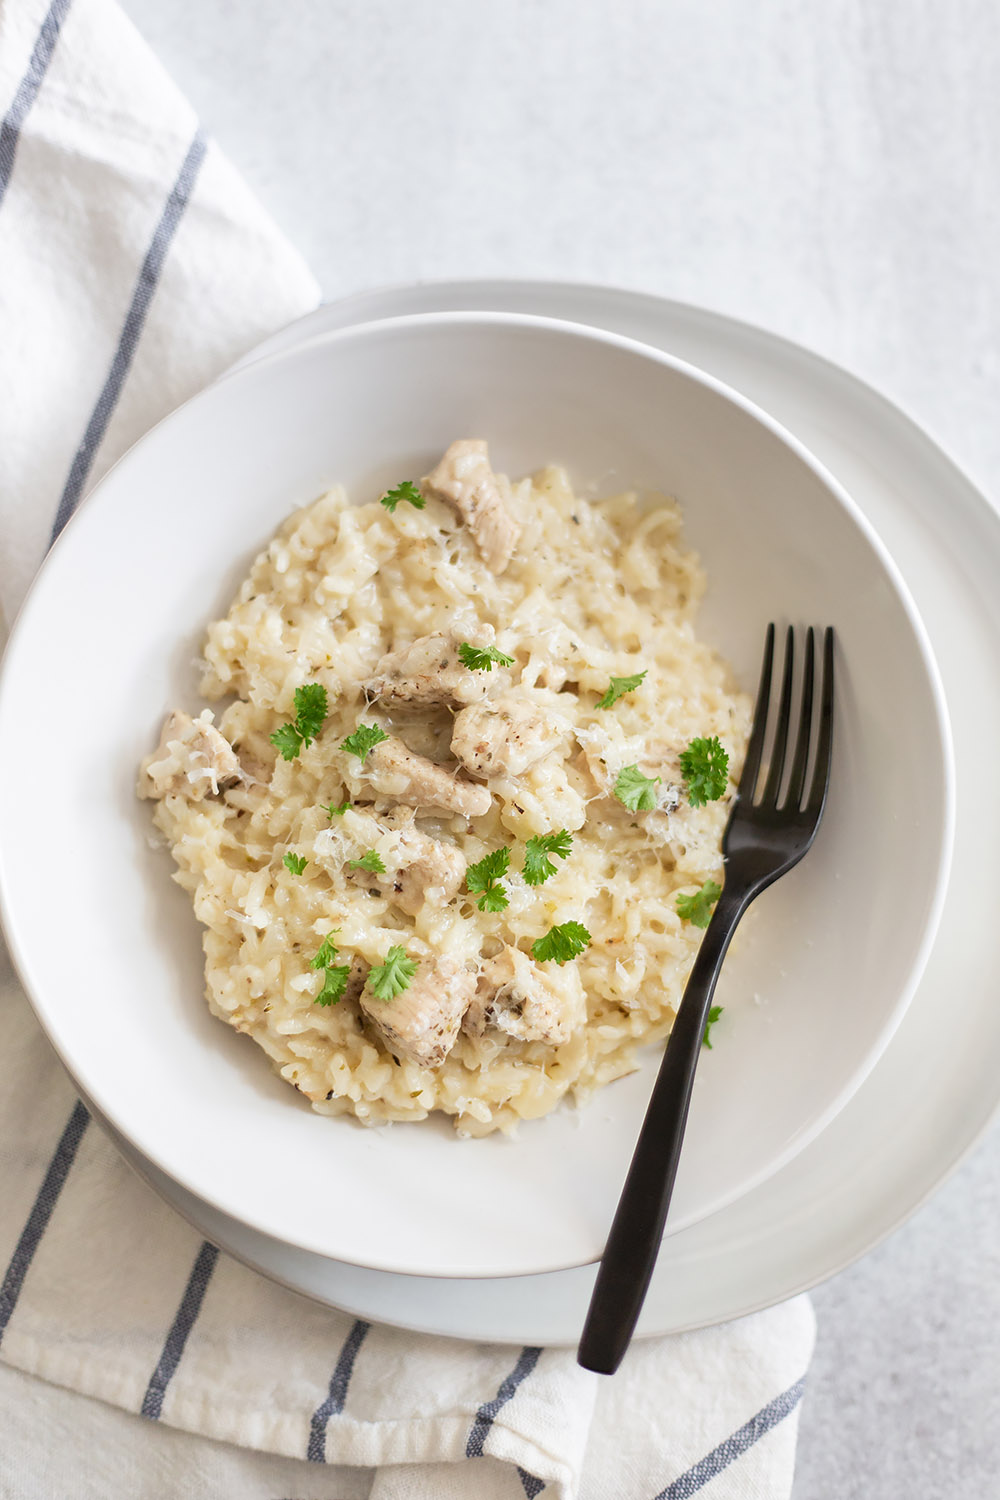 How to Make a Chicken Risotto Step by Step